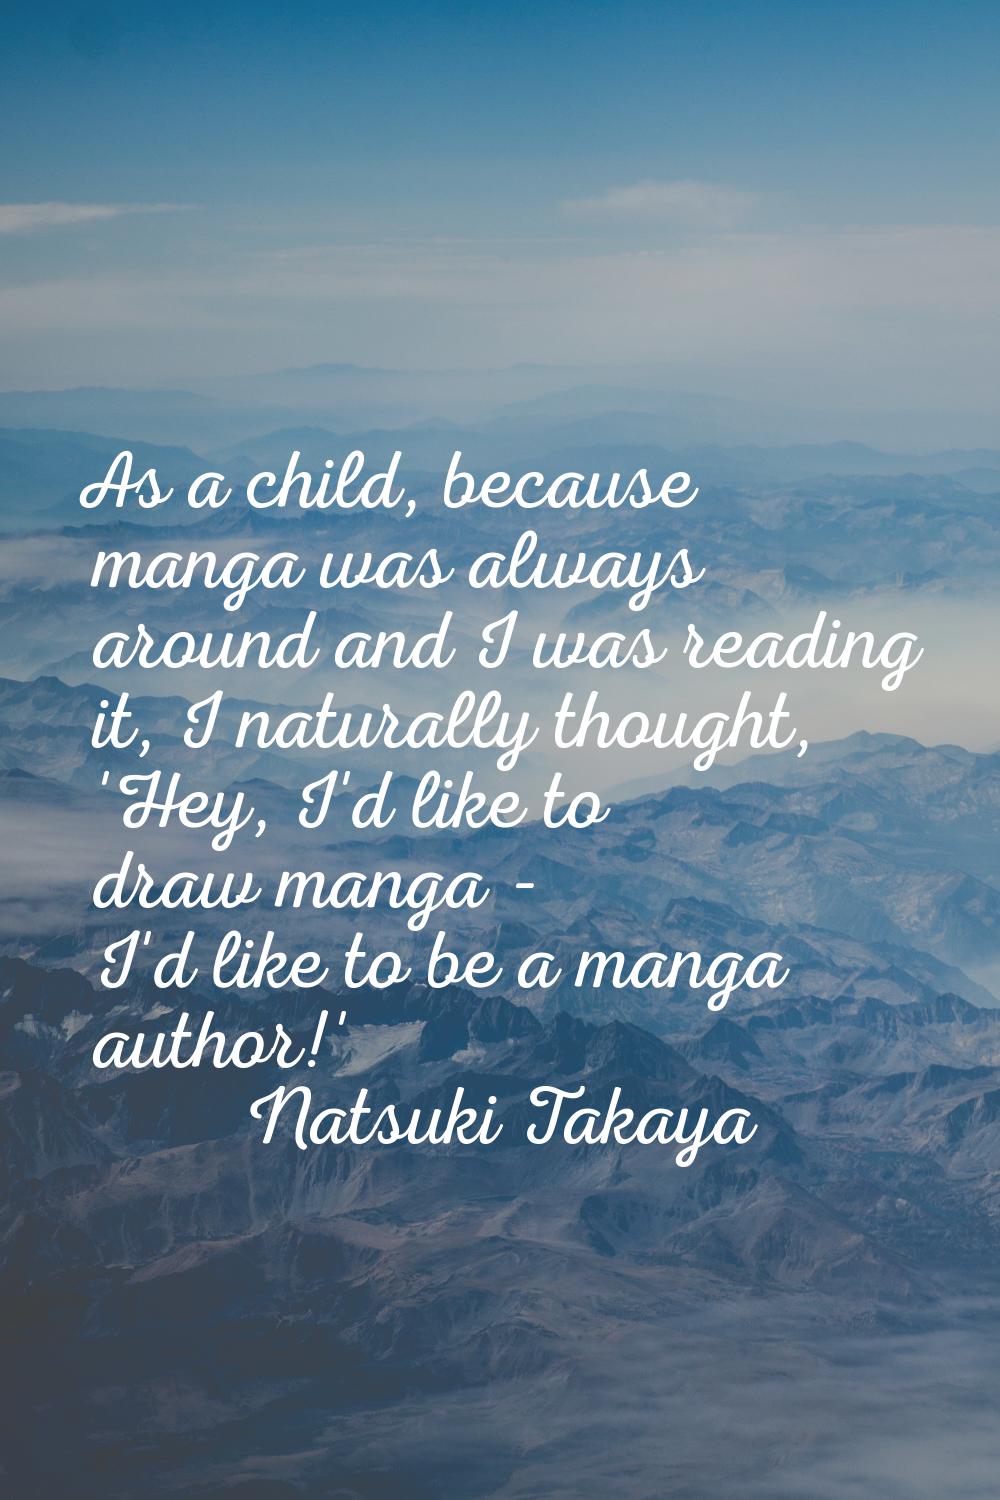 As a child, because manga was always around and I was reading it, I naturally thought, 'Hey, I'd li